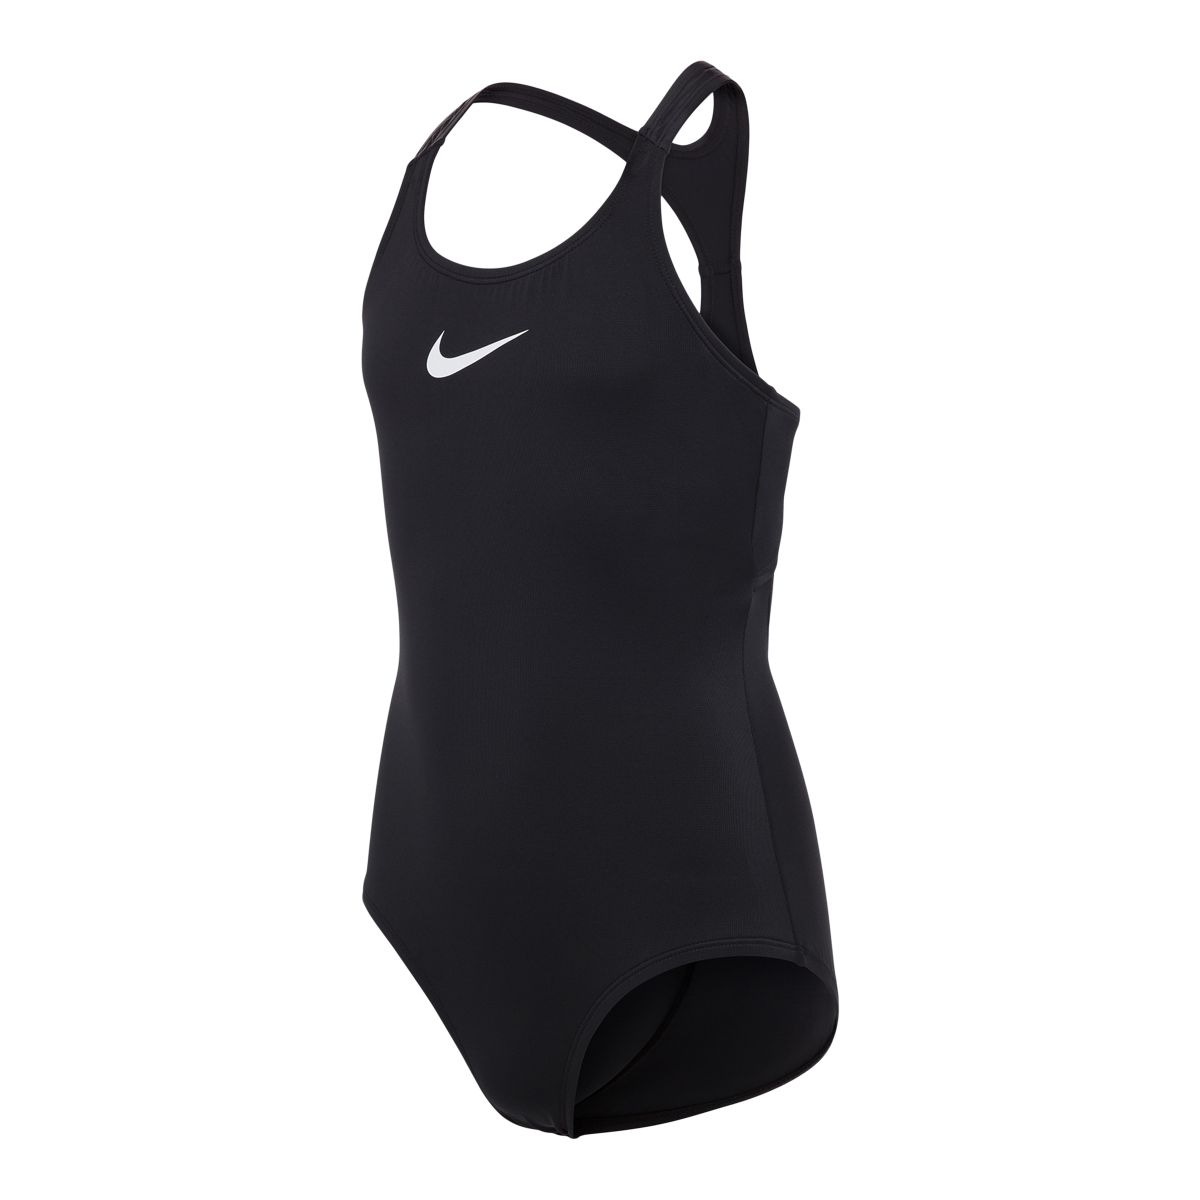 Image of Nike Girls' Essential Racerback One Piece Swimsuit